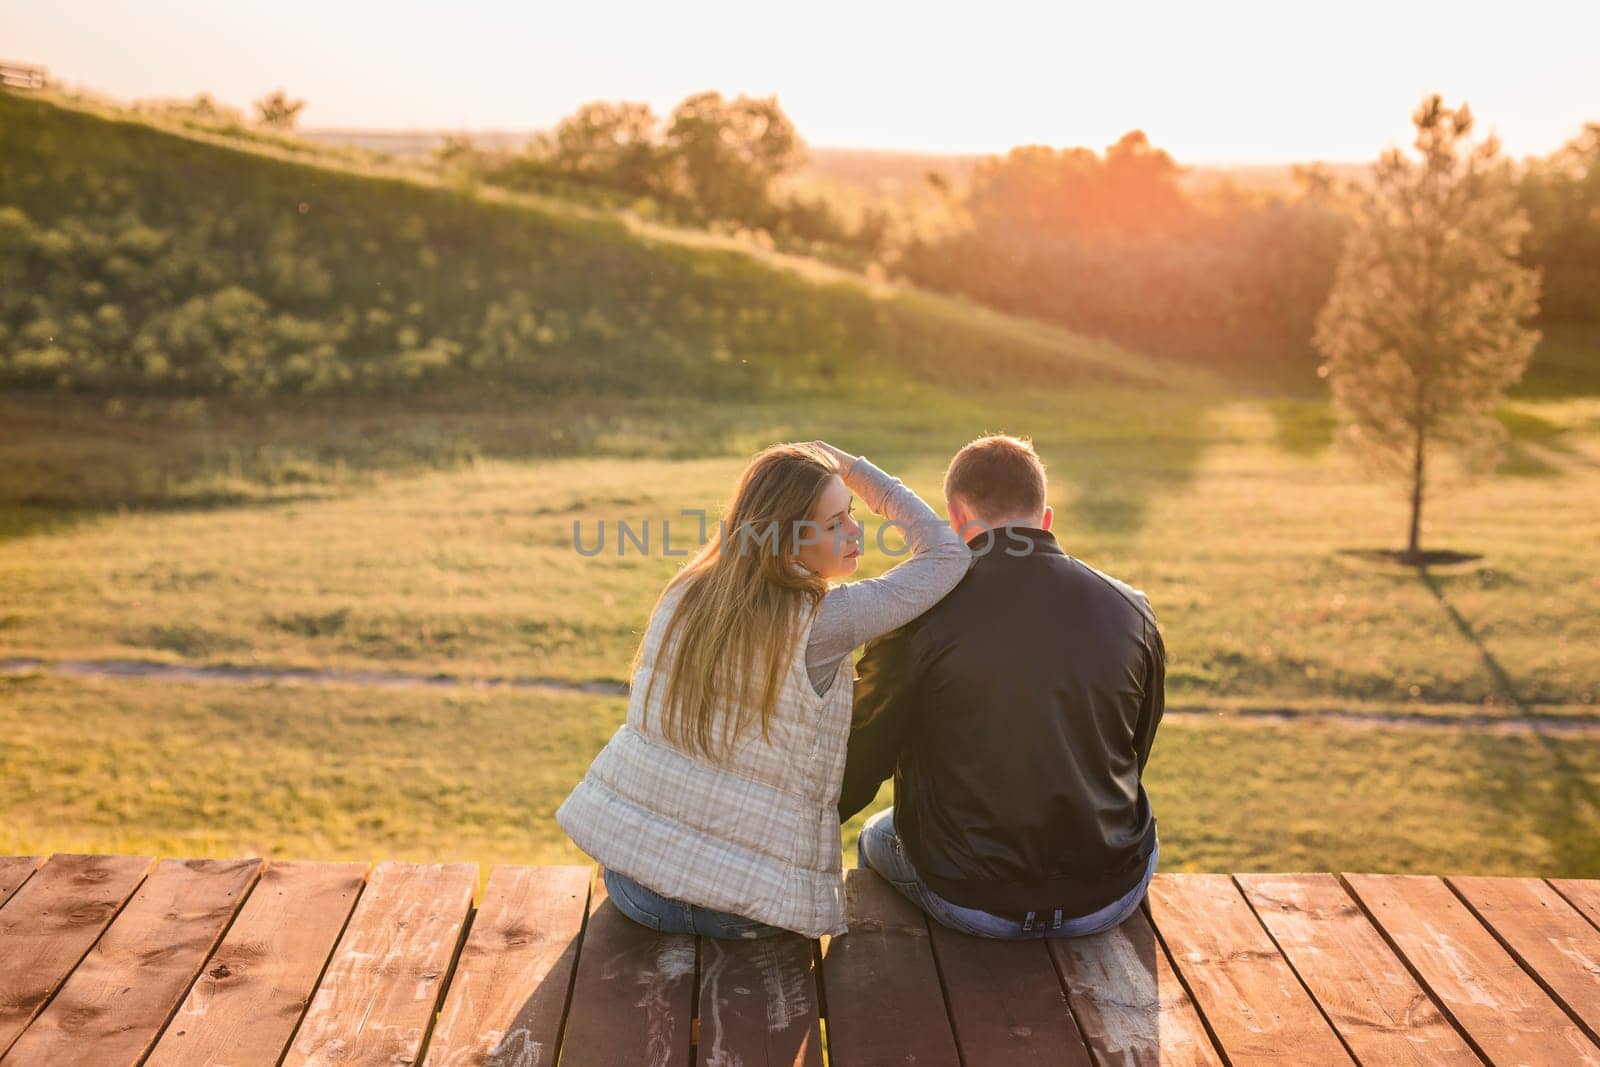 Romantic young couple enjoying autumn nature sitting in a close embrace, view from behind by Satura86